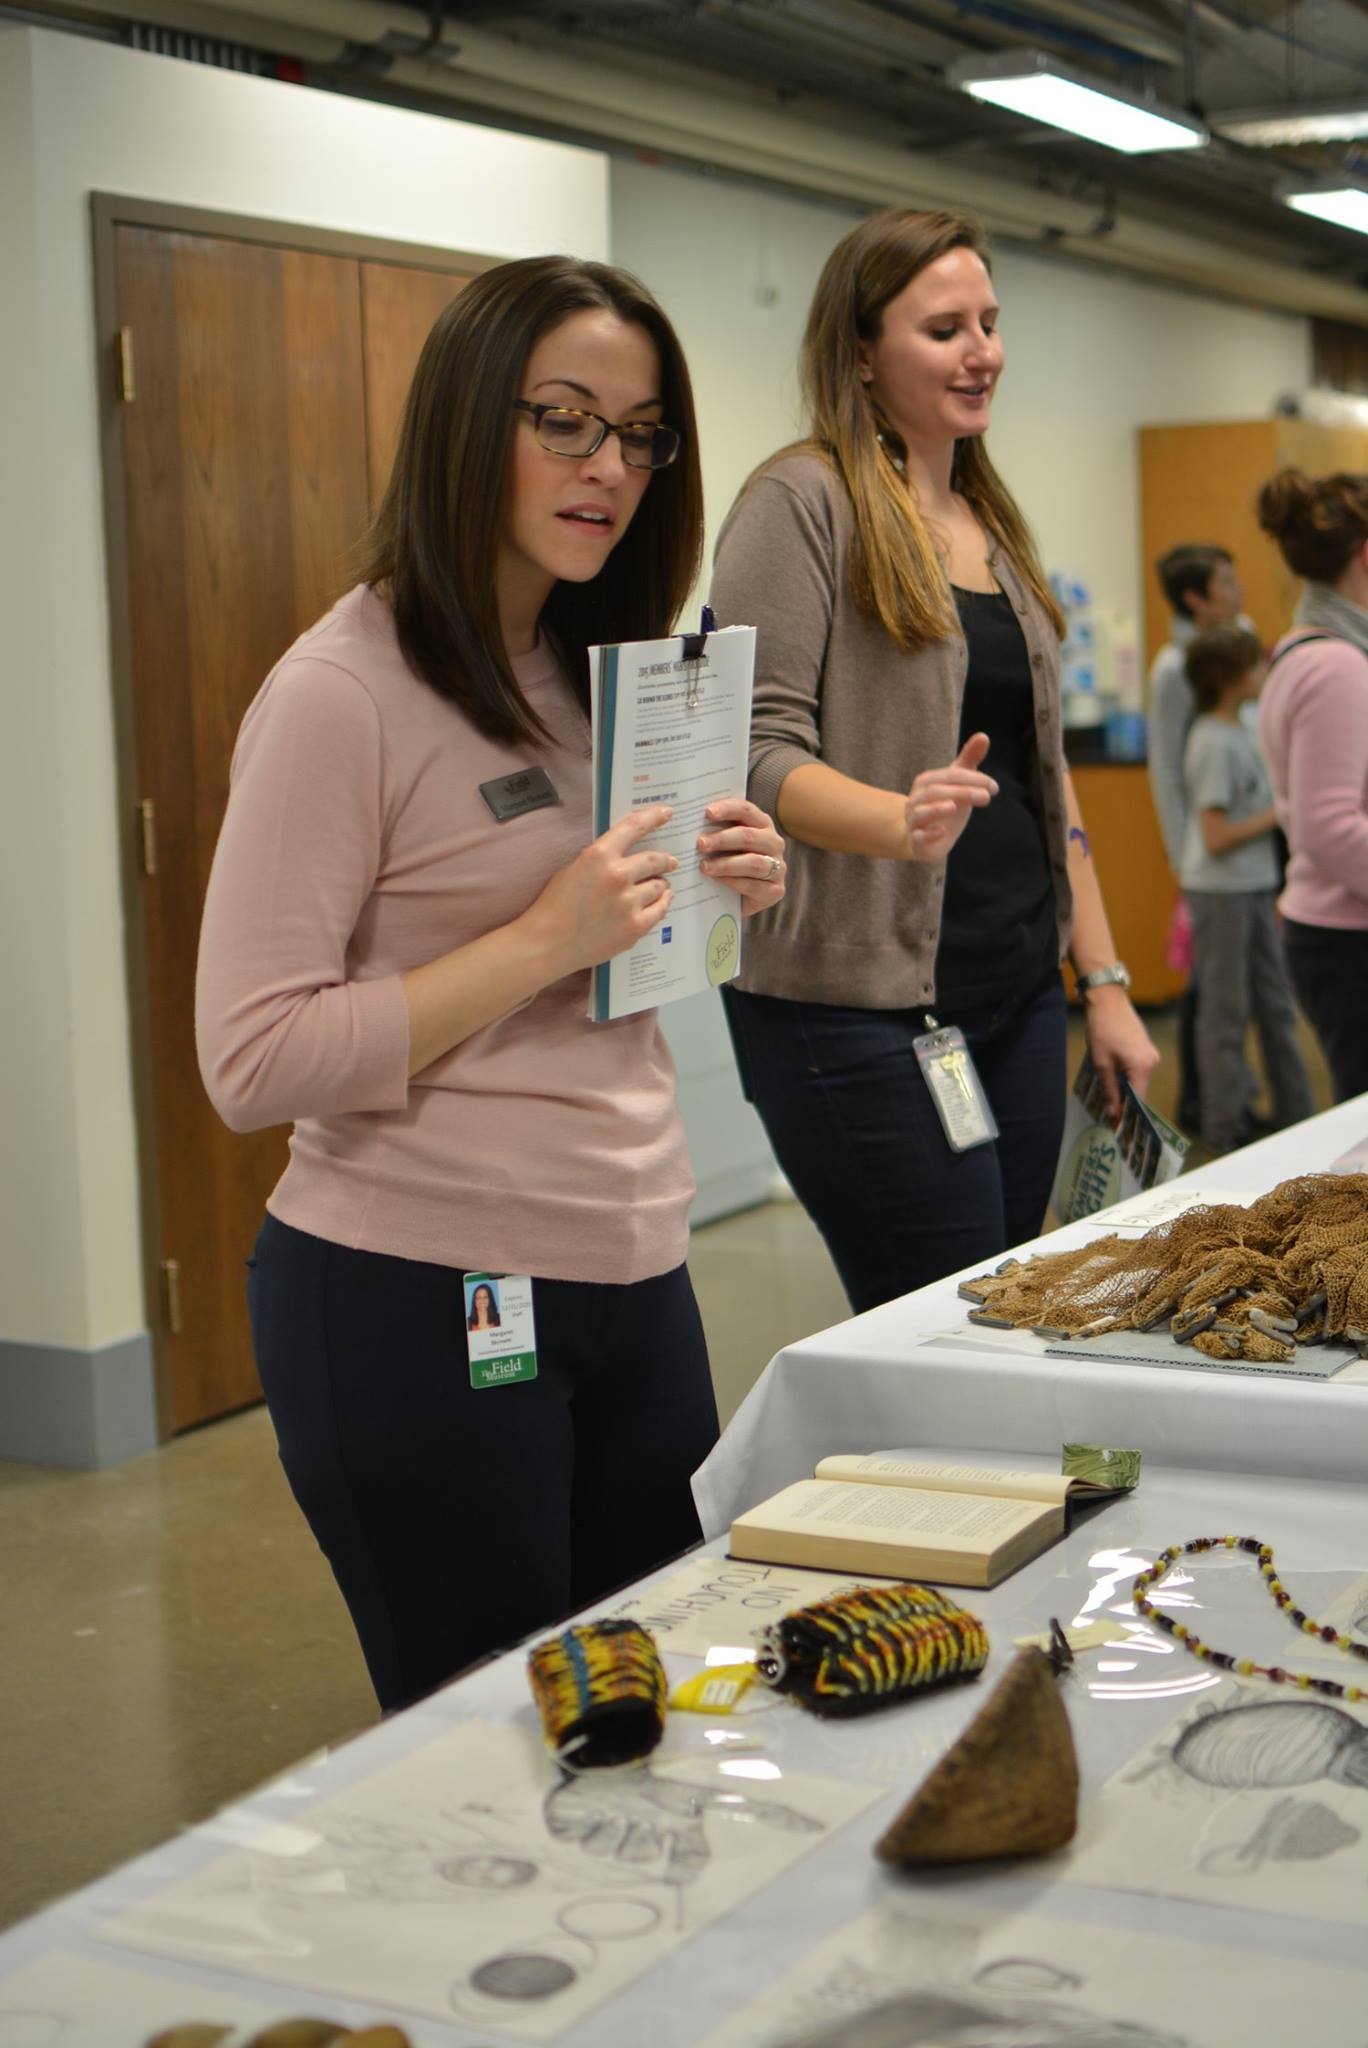 Fellow Field Museum staff members visit room 3805 to view the Anthropology collections. 